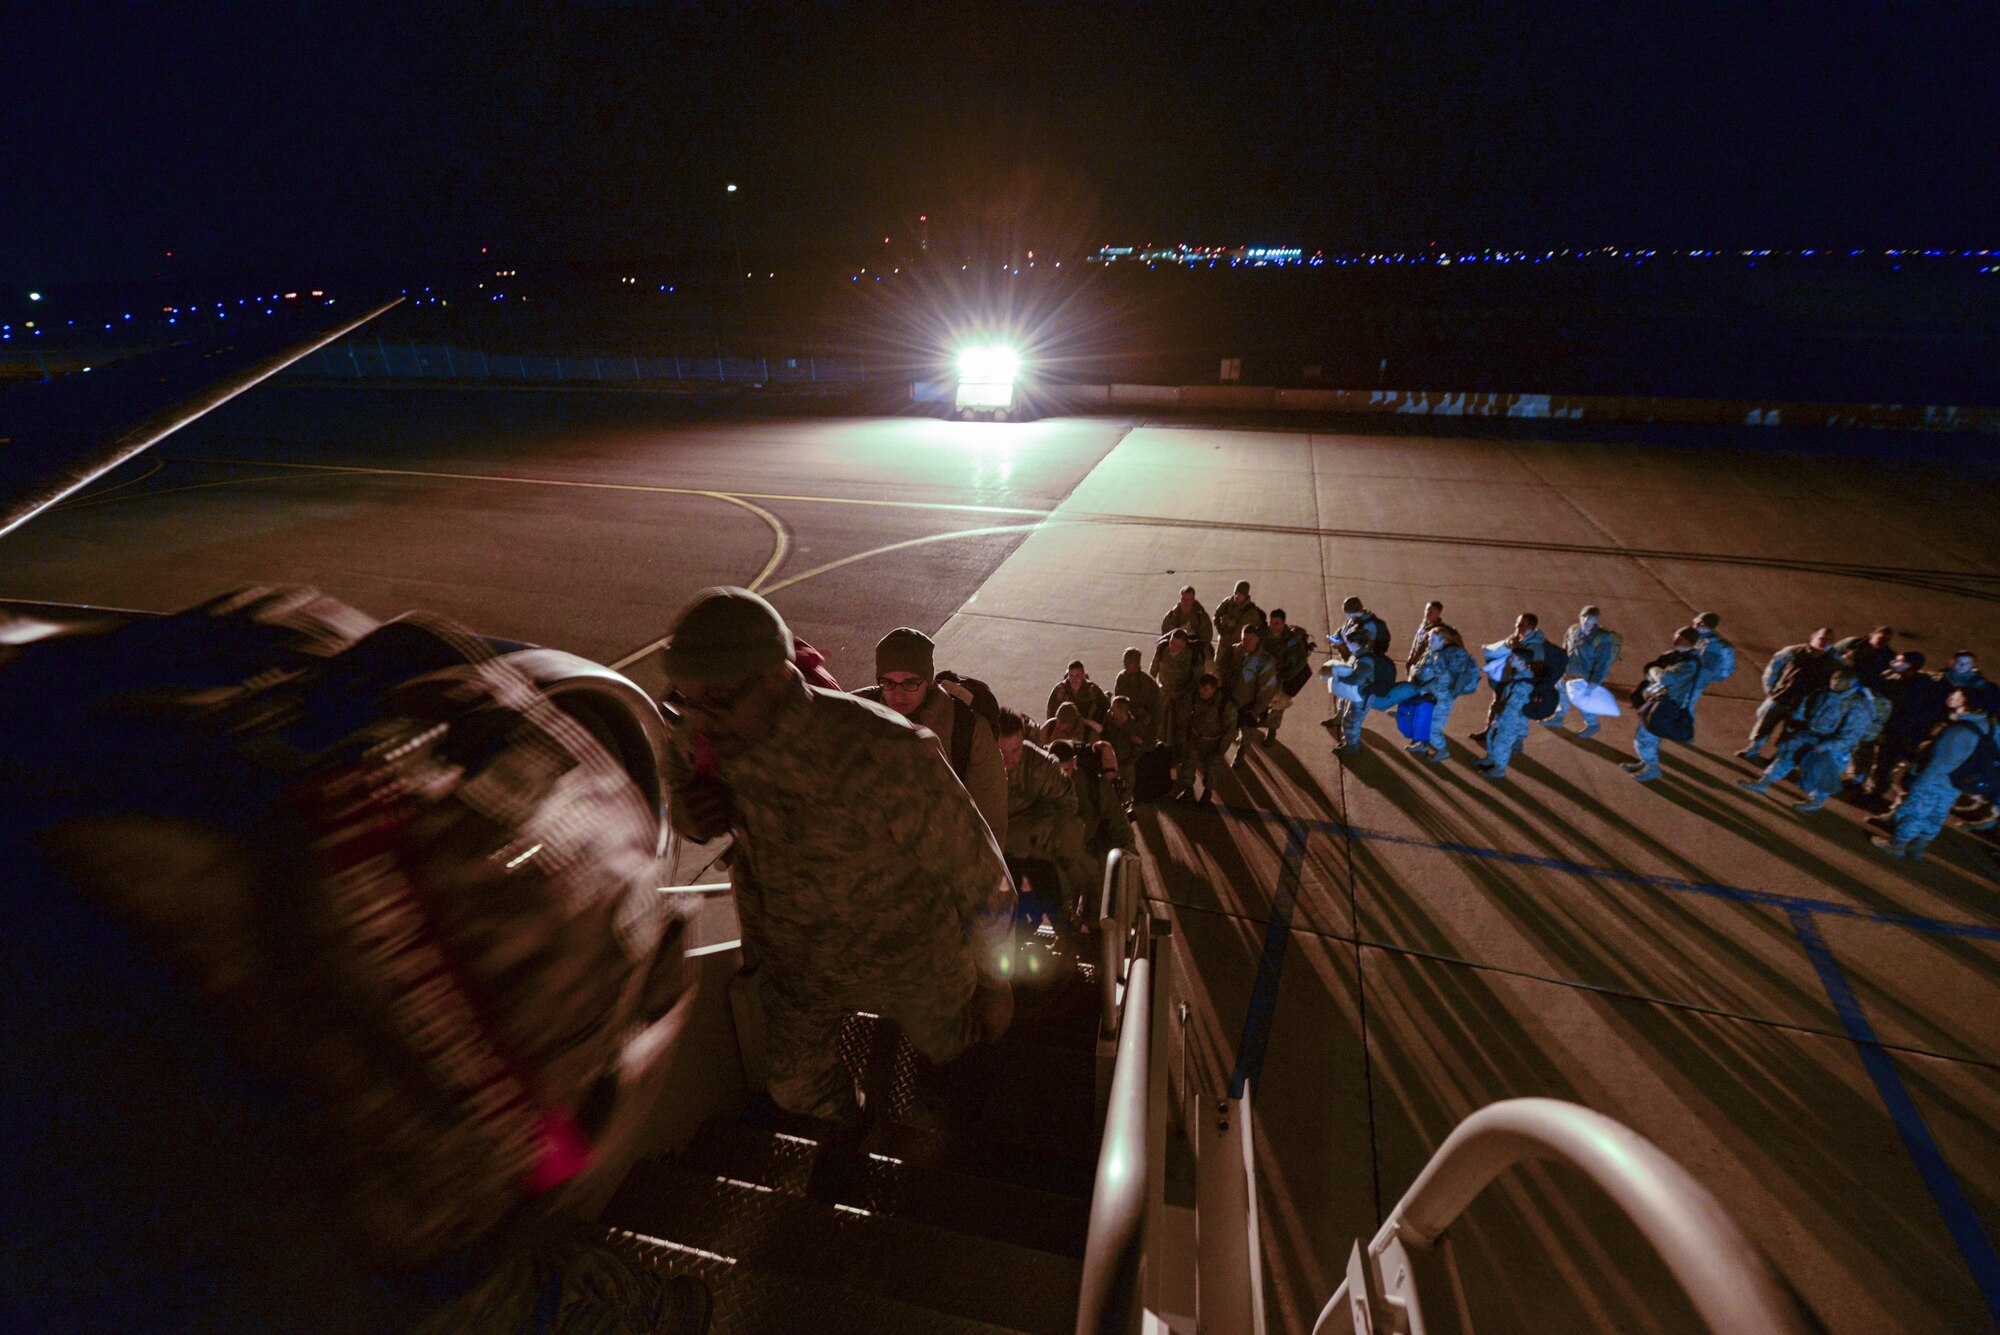 A picture of U.S. Air Force Airmen from the New Jersey Air National Guard's 177th Fighter Wing boarding a commercial aircraft.